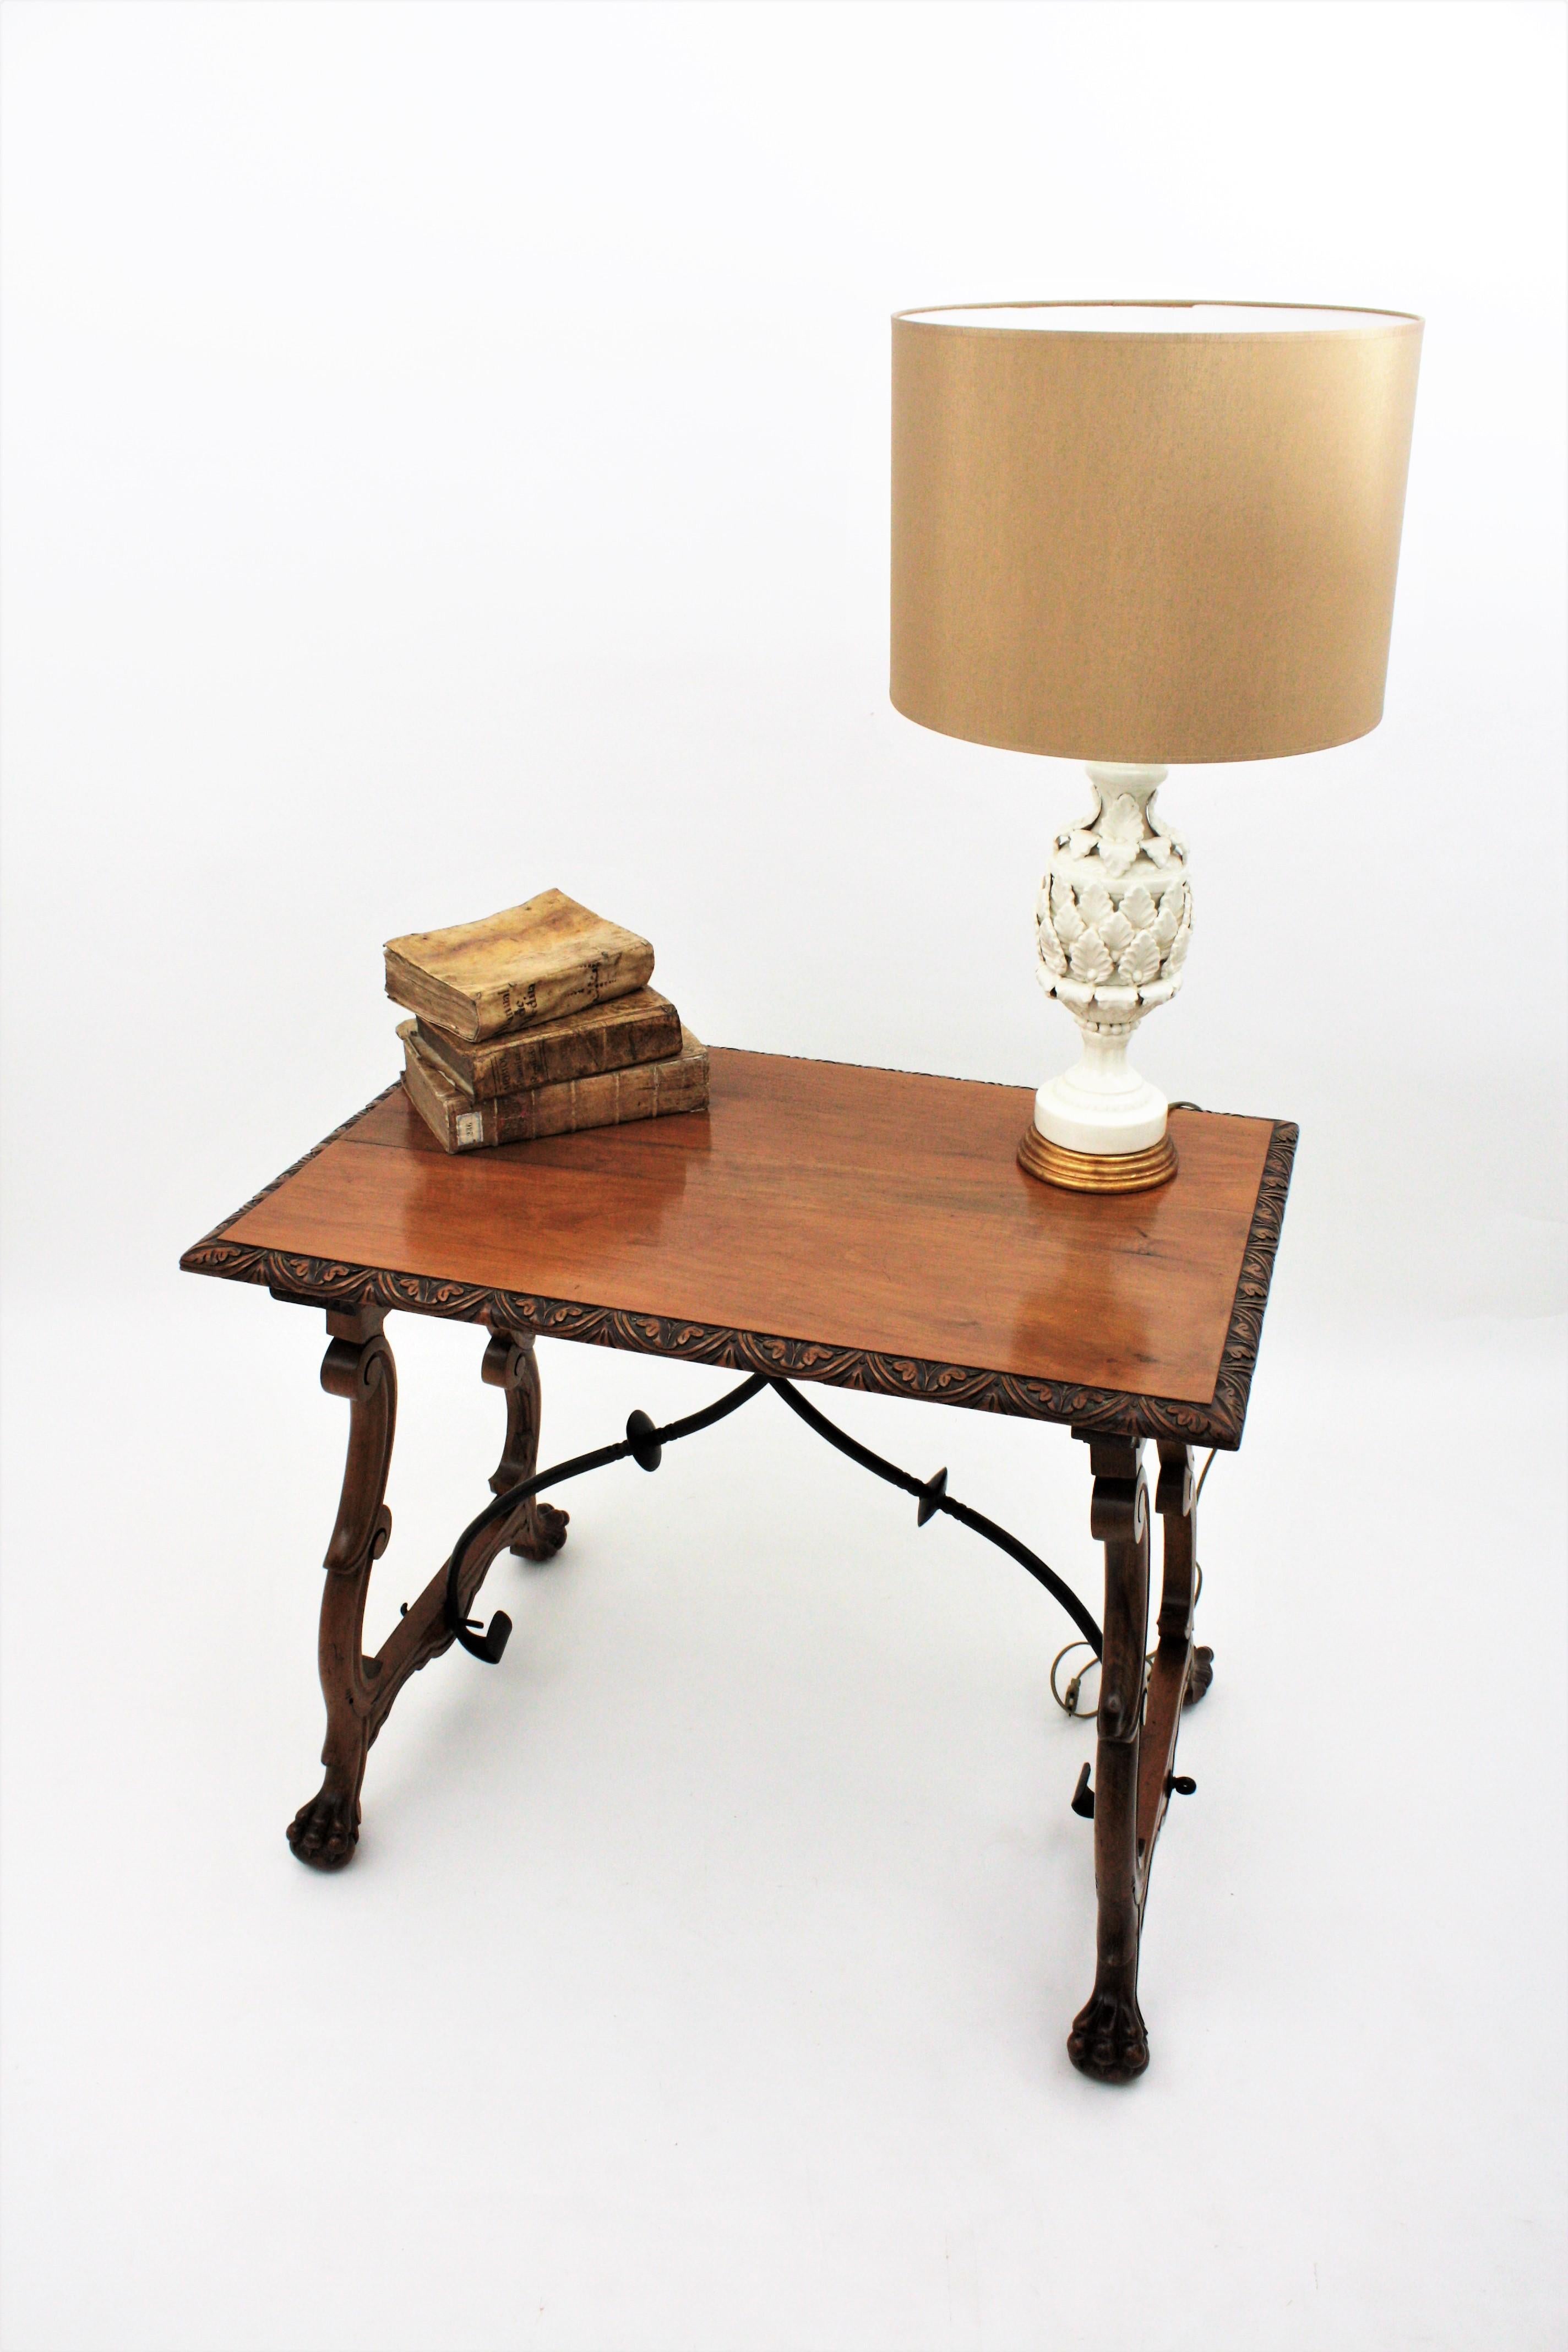 Spanish Colonial Baroque walnut lyre-leg fratino table with iron stretcher
Exquisite antique hand carved lyre-leg walnut wood Fratino trestle table with iron stretchers.
This gorgeous Fratino table features a rectangular top with beautifully carved